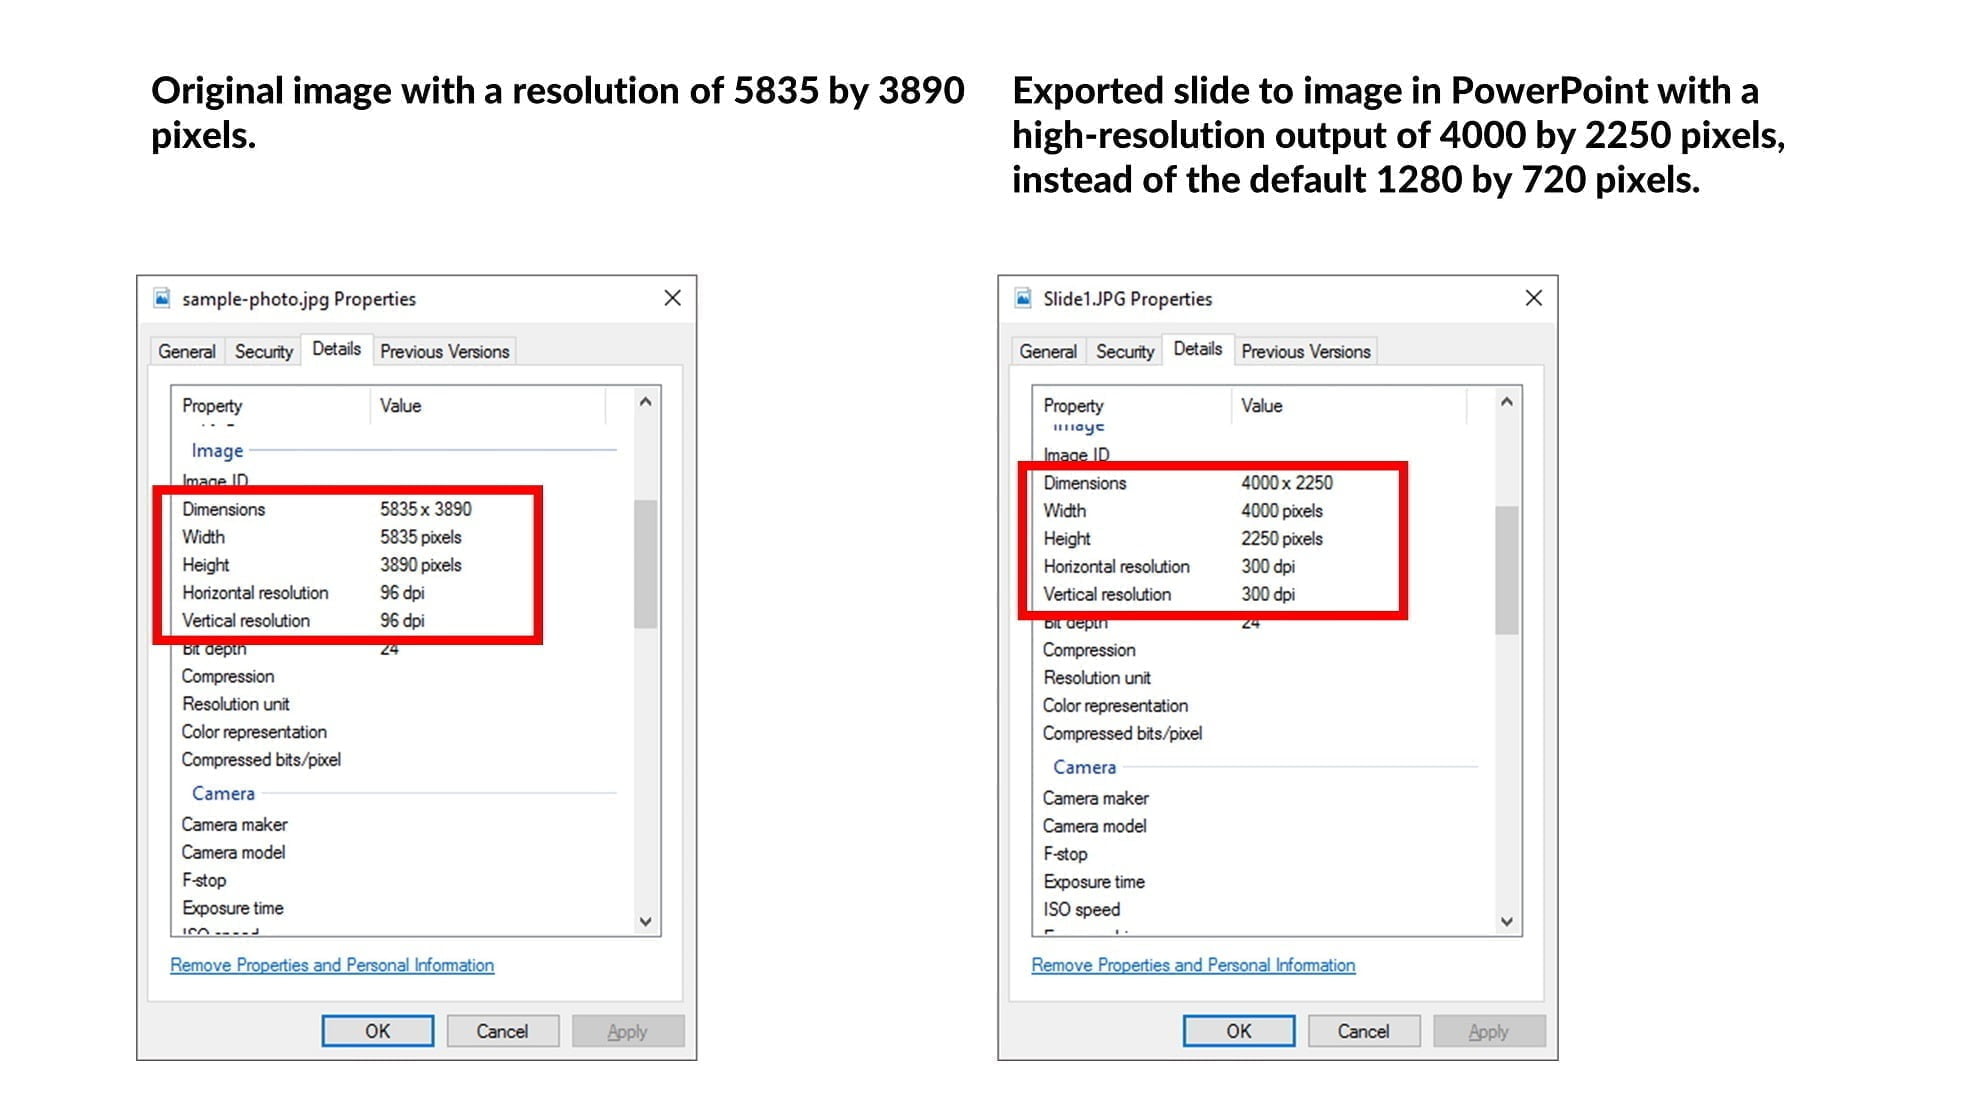 file details with resolution info on the generated powerpoint image export